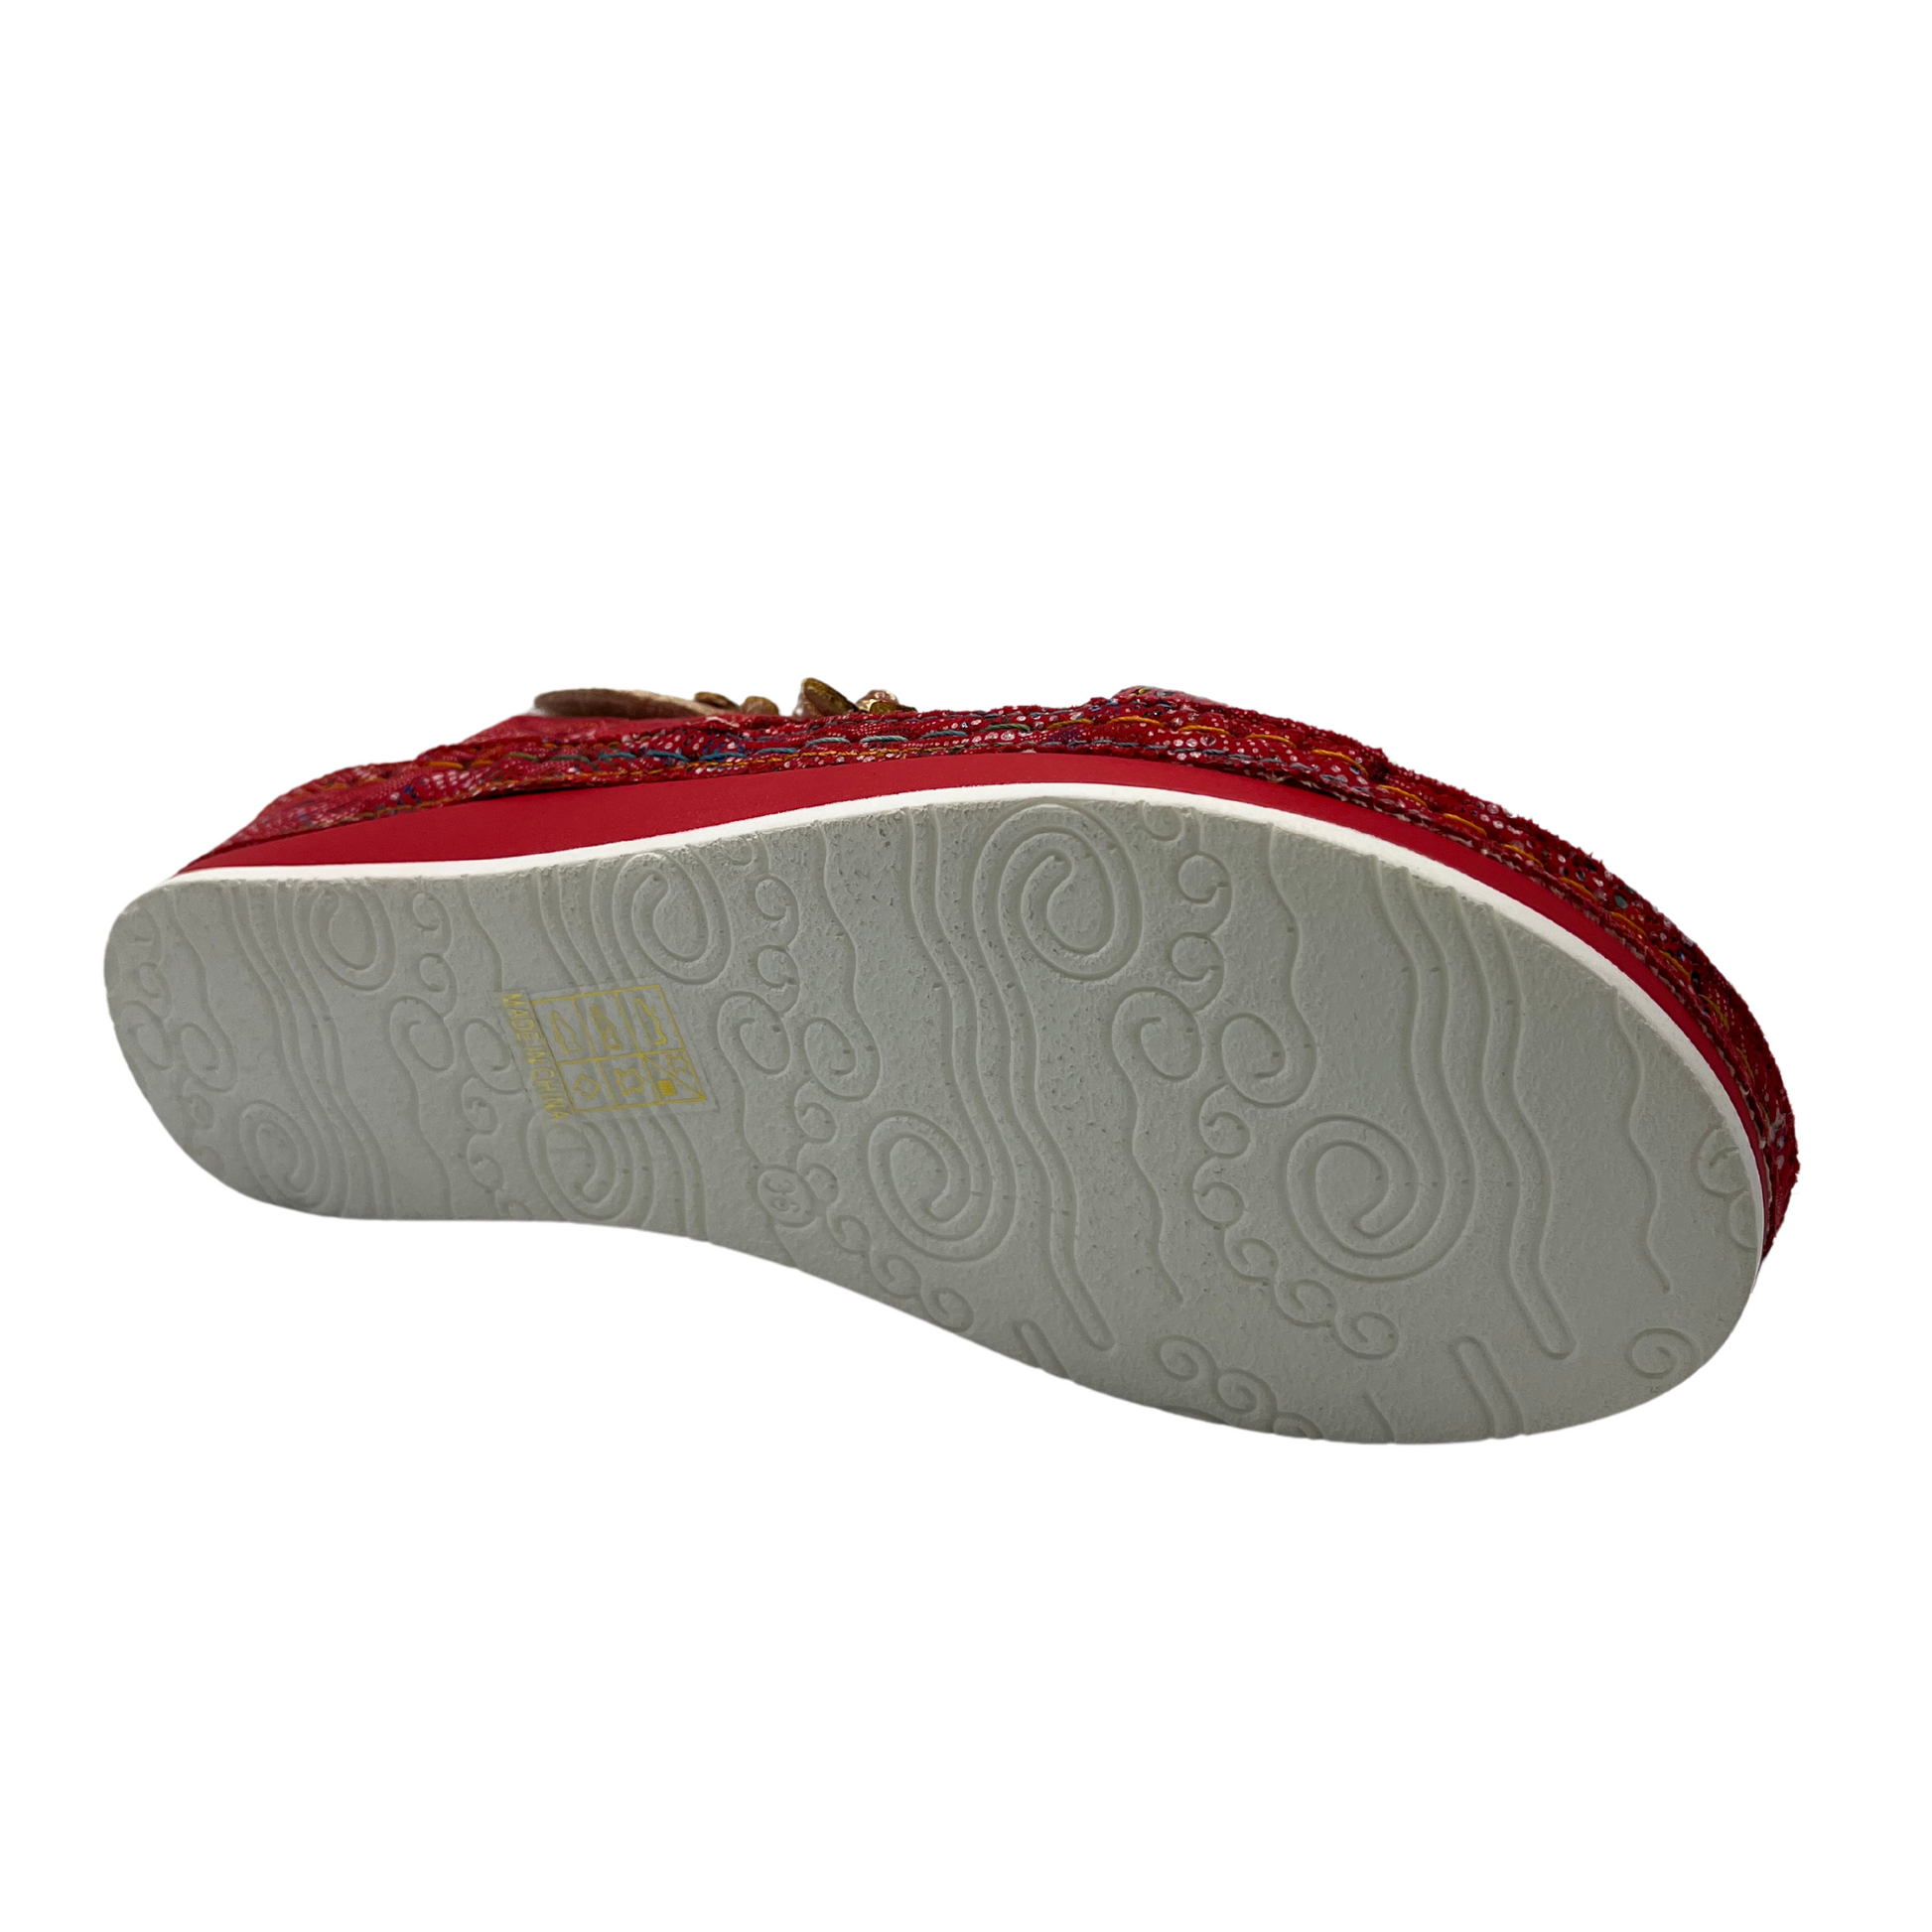 Bottom view of a red leather sandal with flower details and velcro ankle strap